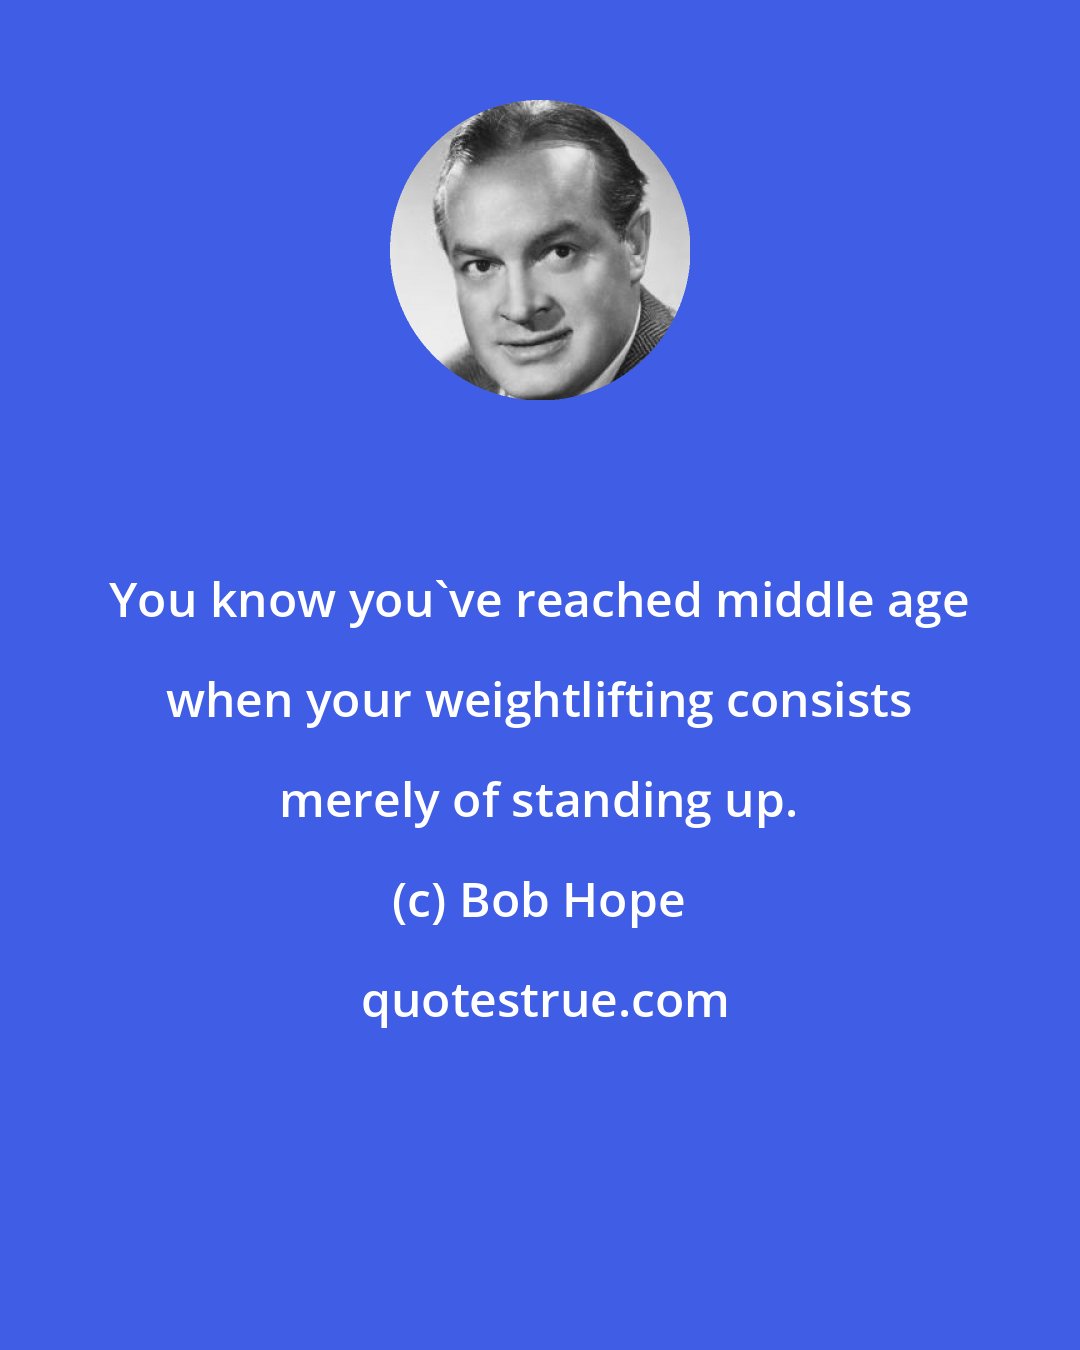 Bob Hope: You know you've reached middle age when your weightlifting consists merely of standing up.